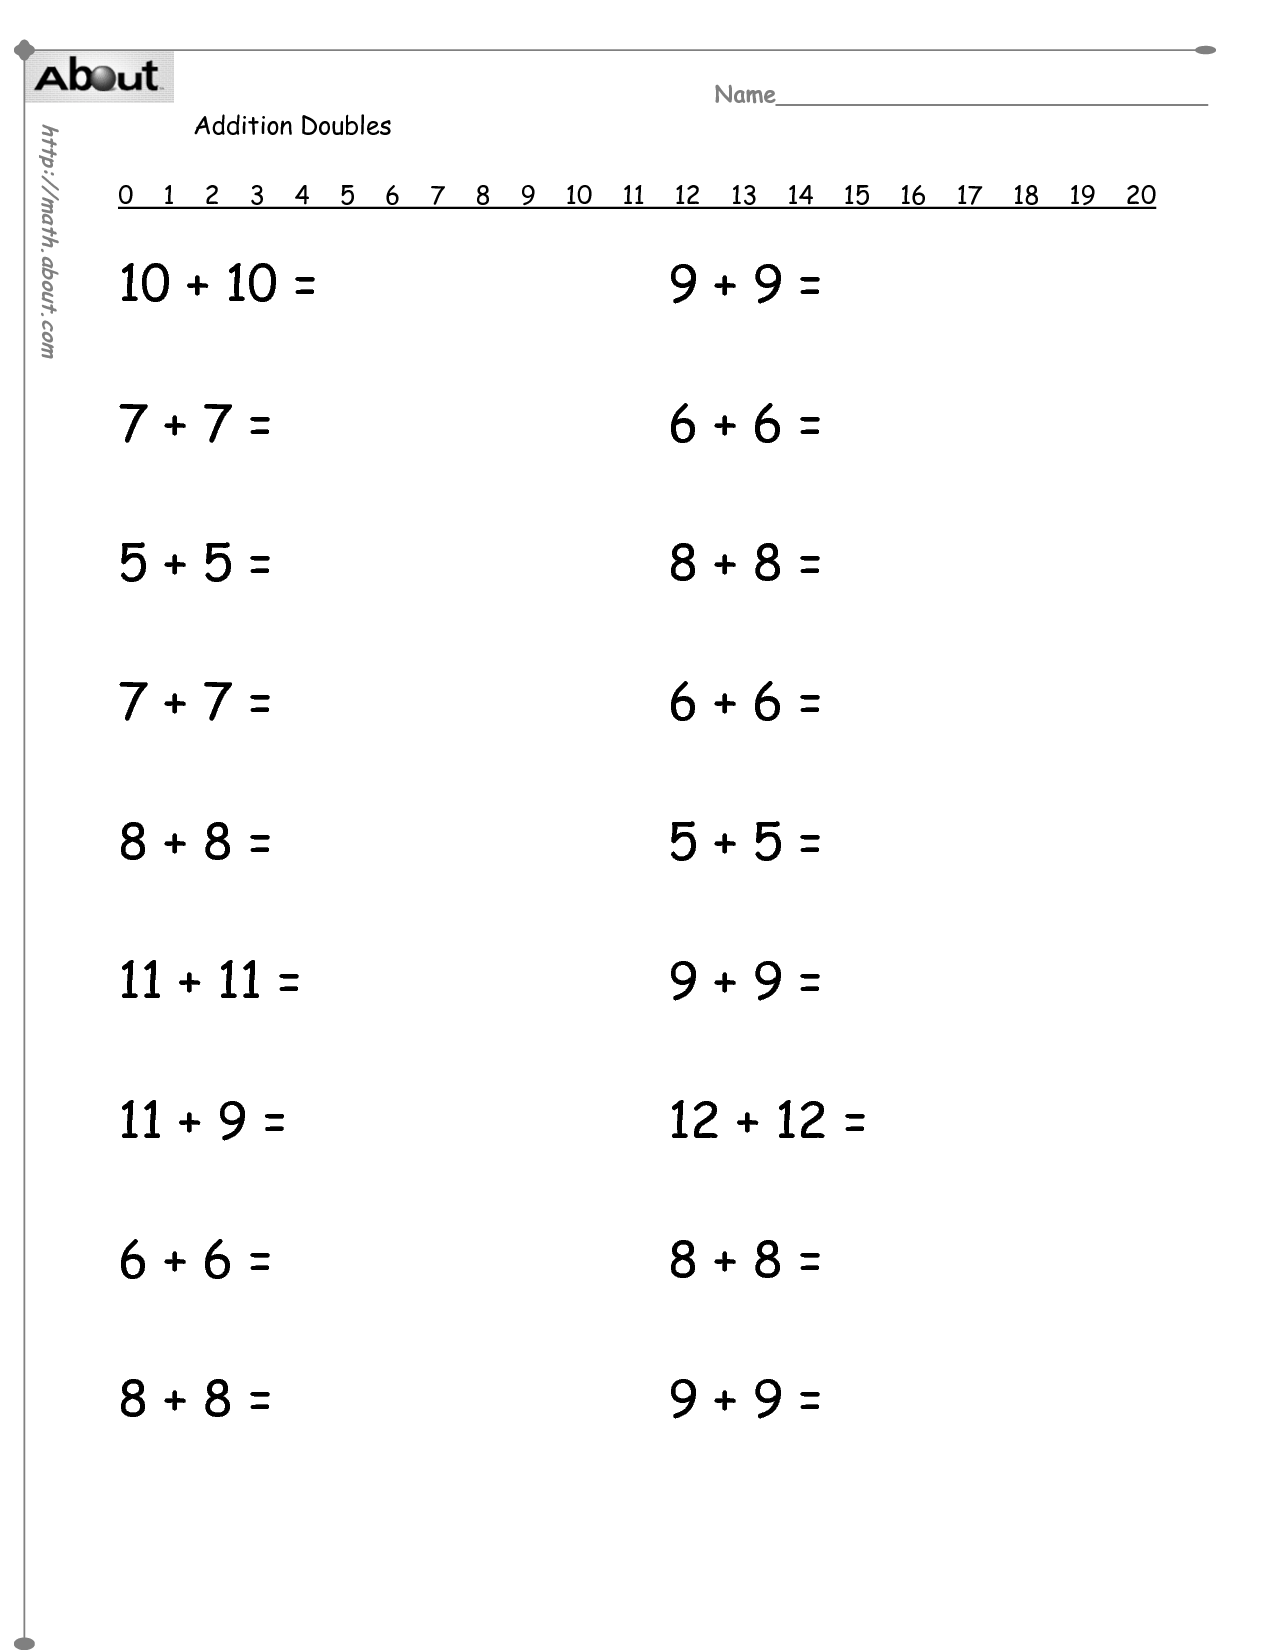 15-best-images-of-printable-double-digit-addition-worksheets-doubles-math-facts-worksheets